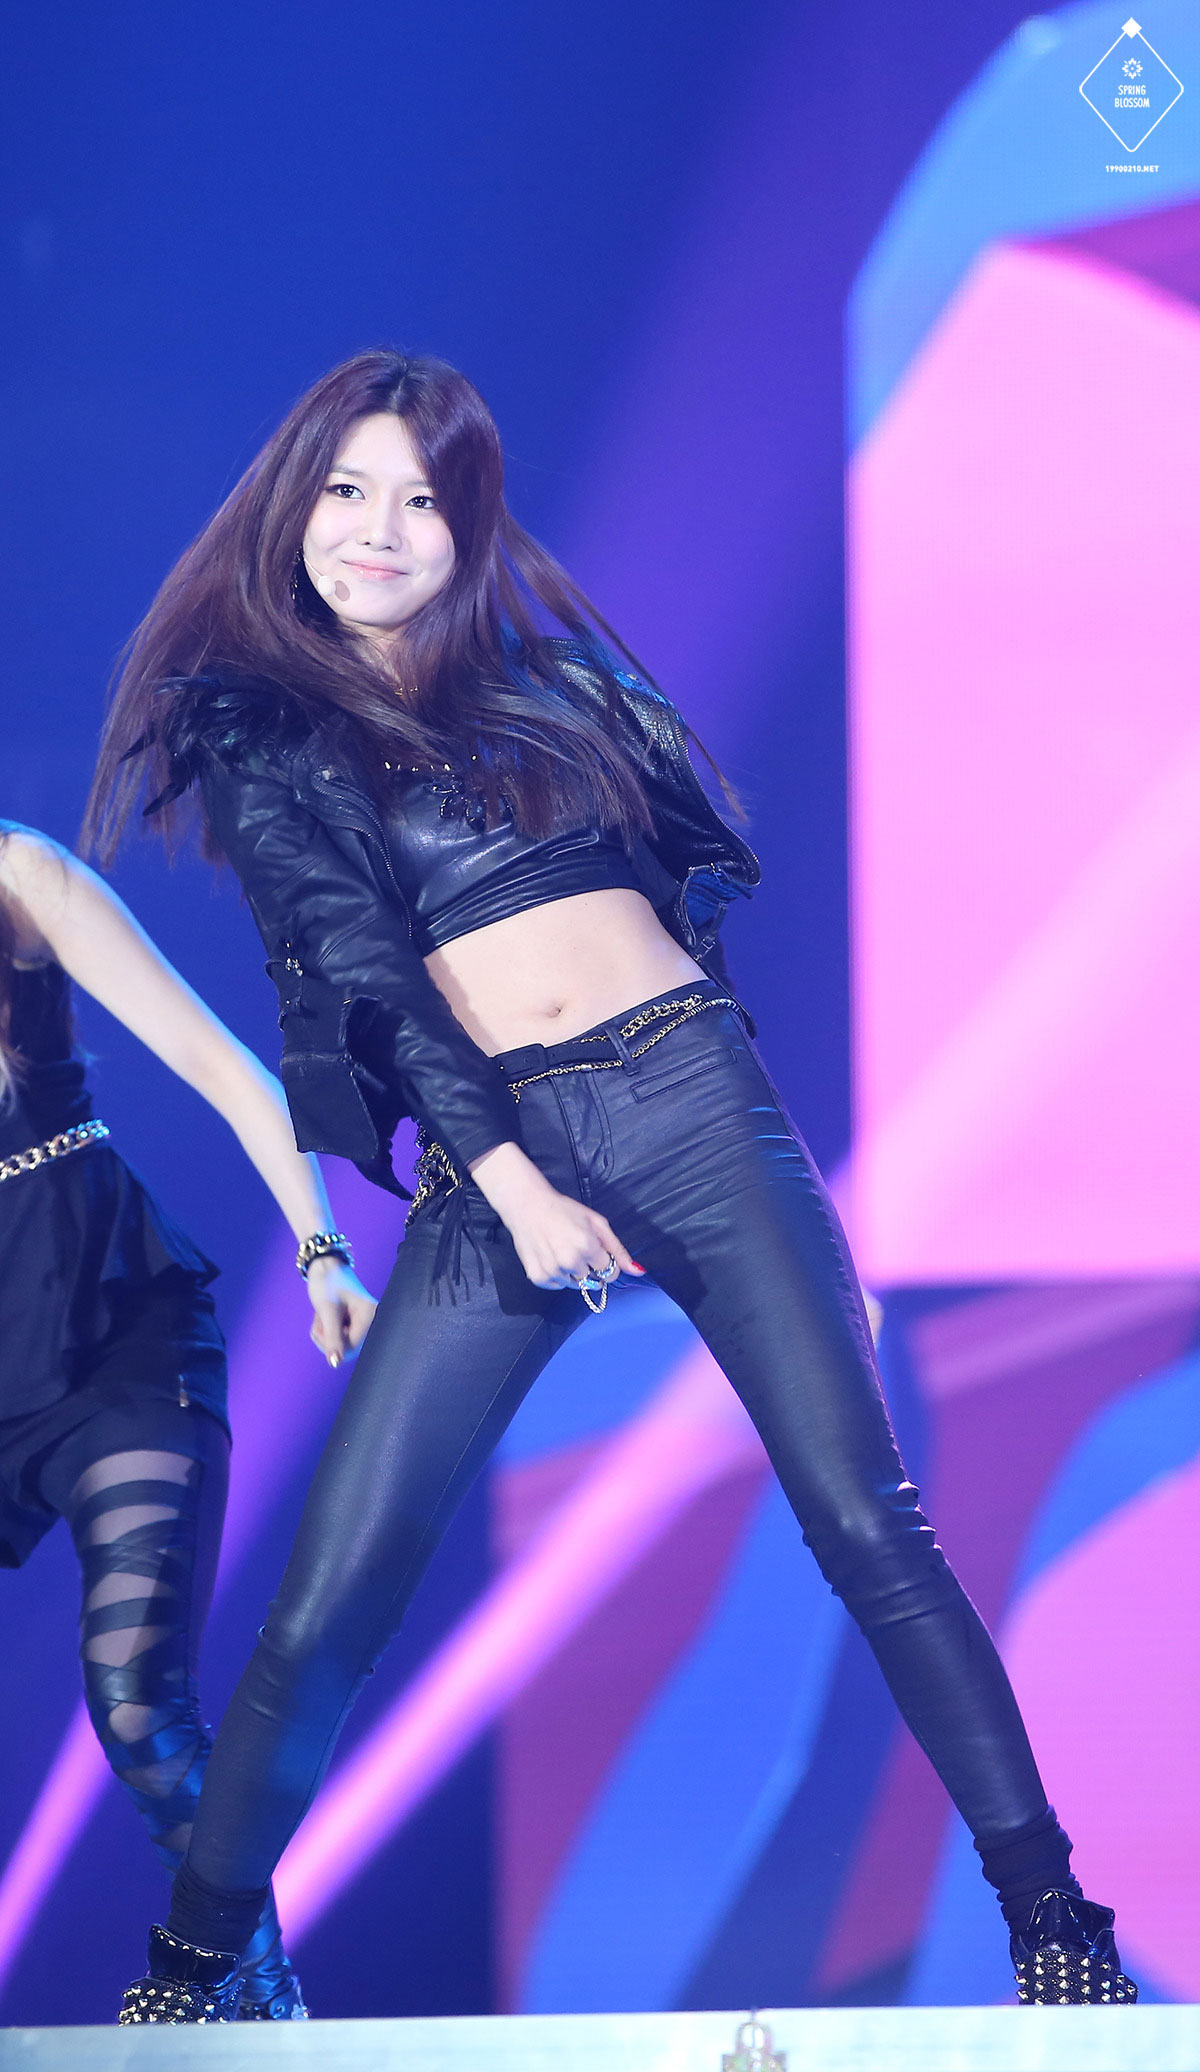 Sooyoung @ SBS Music Festival 2013